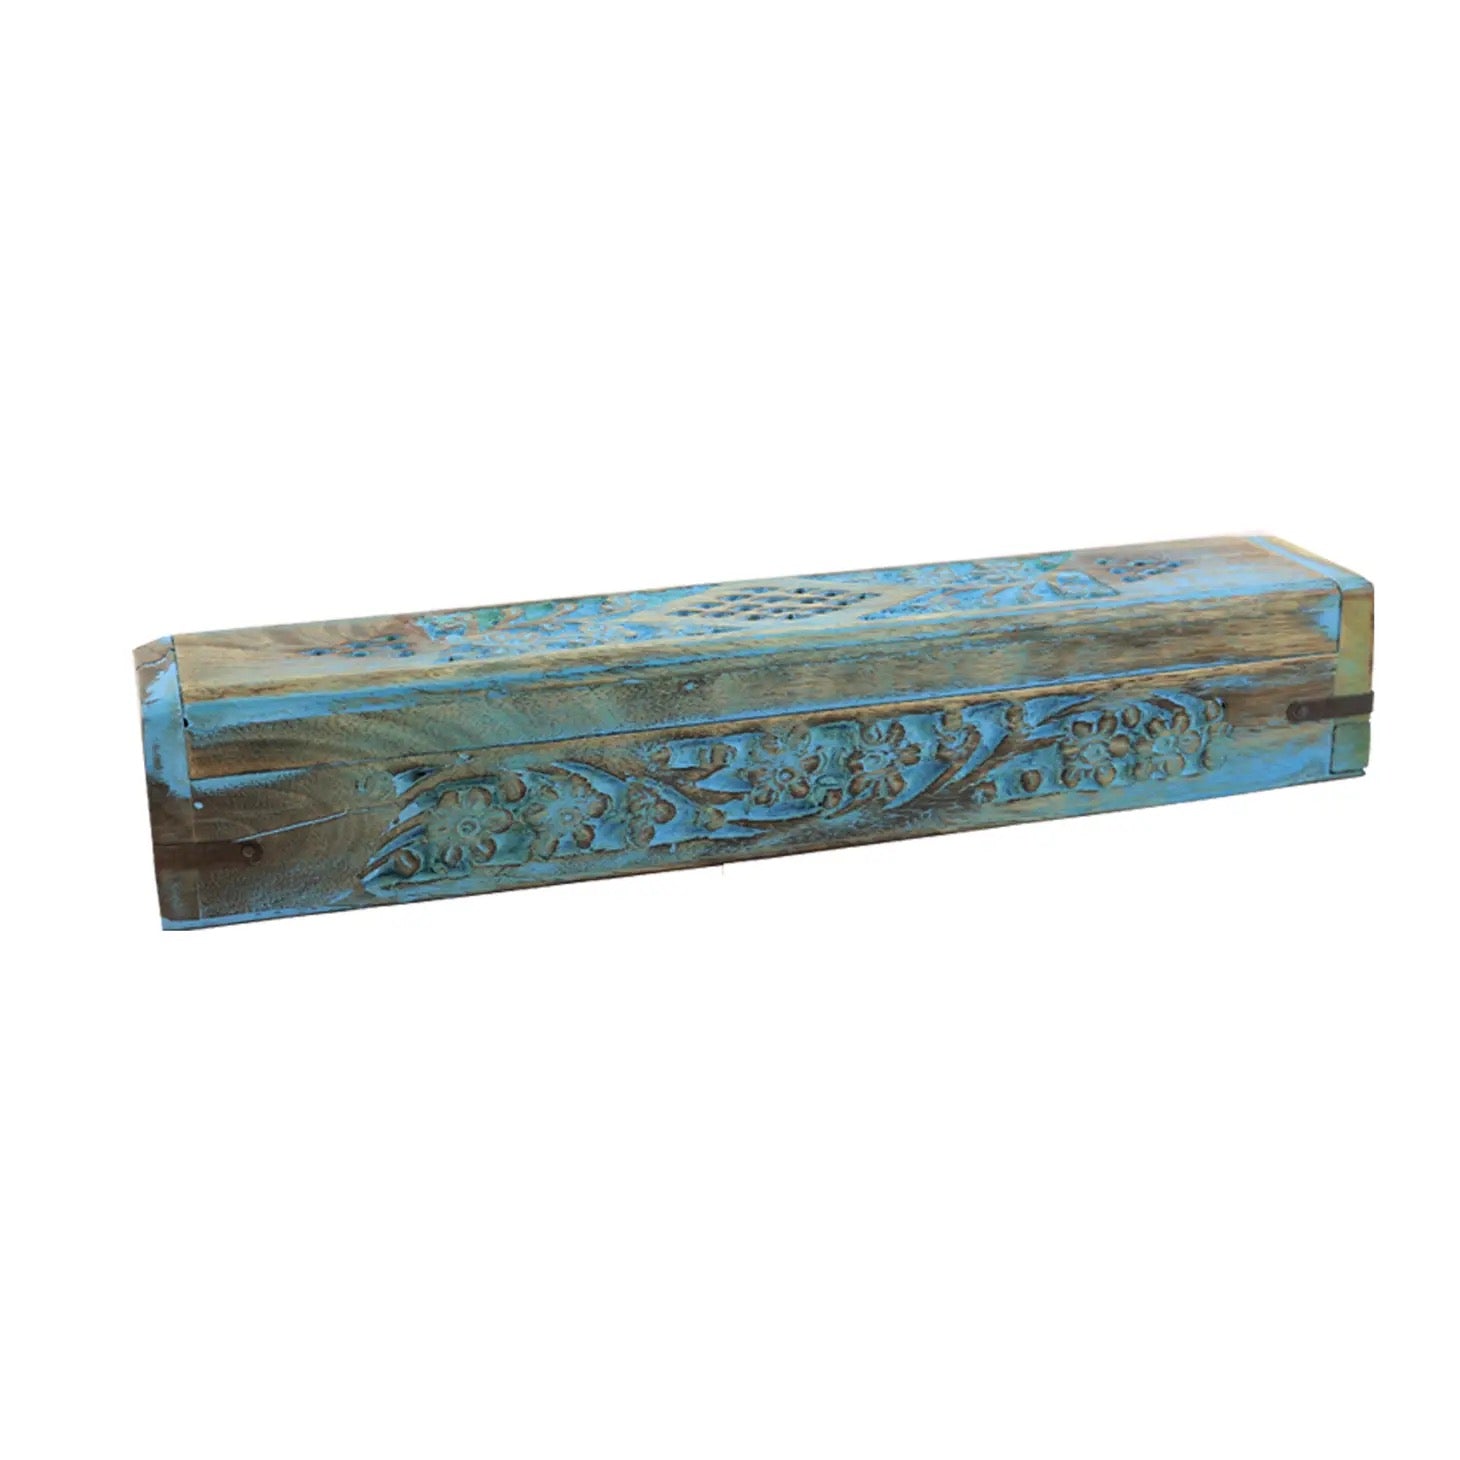 DESIGNS BY DEEKAY INC - Blue Floral Hand Carved Incense Wooden Coffin Box